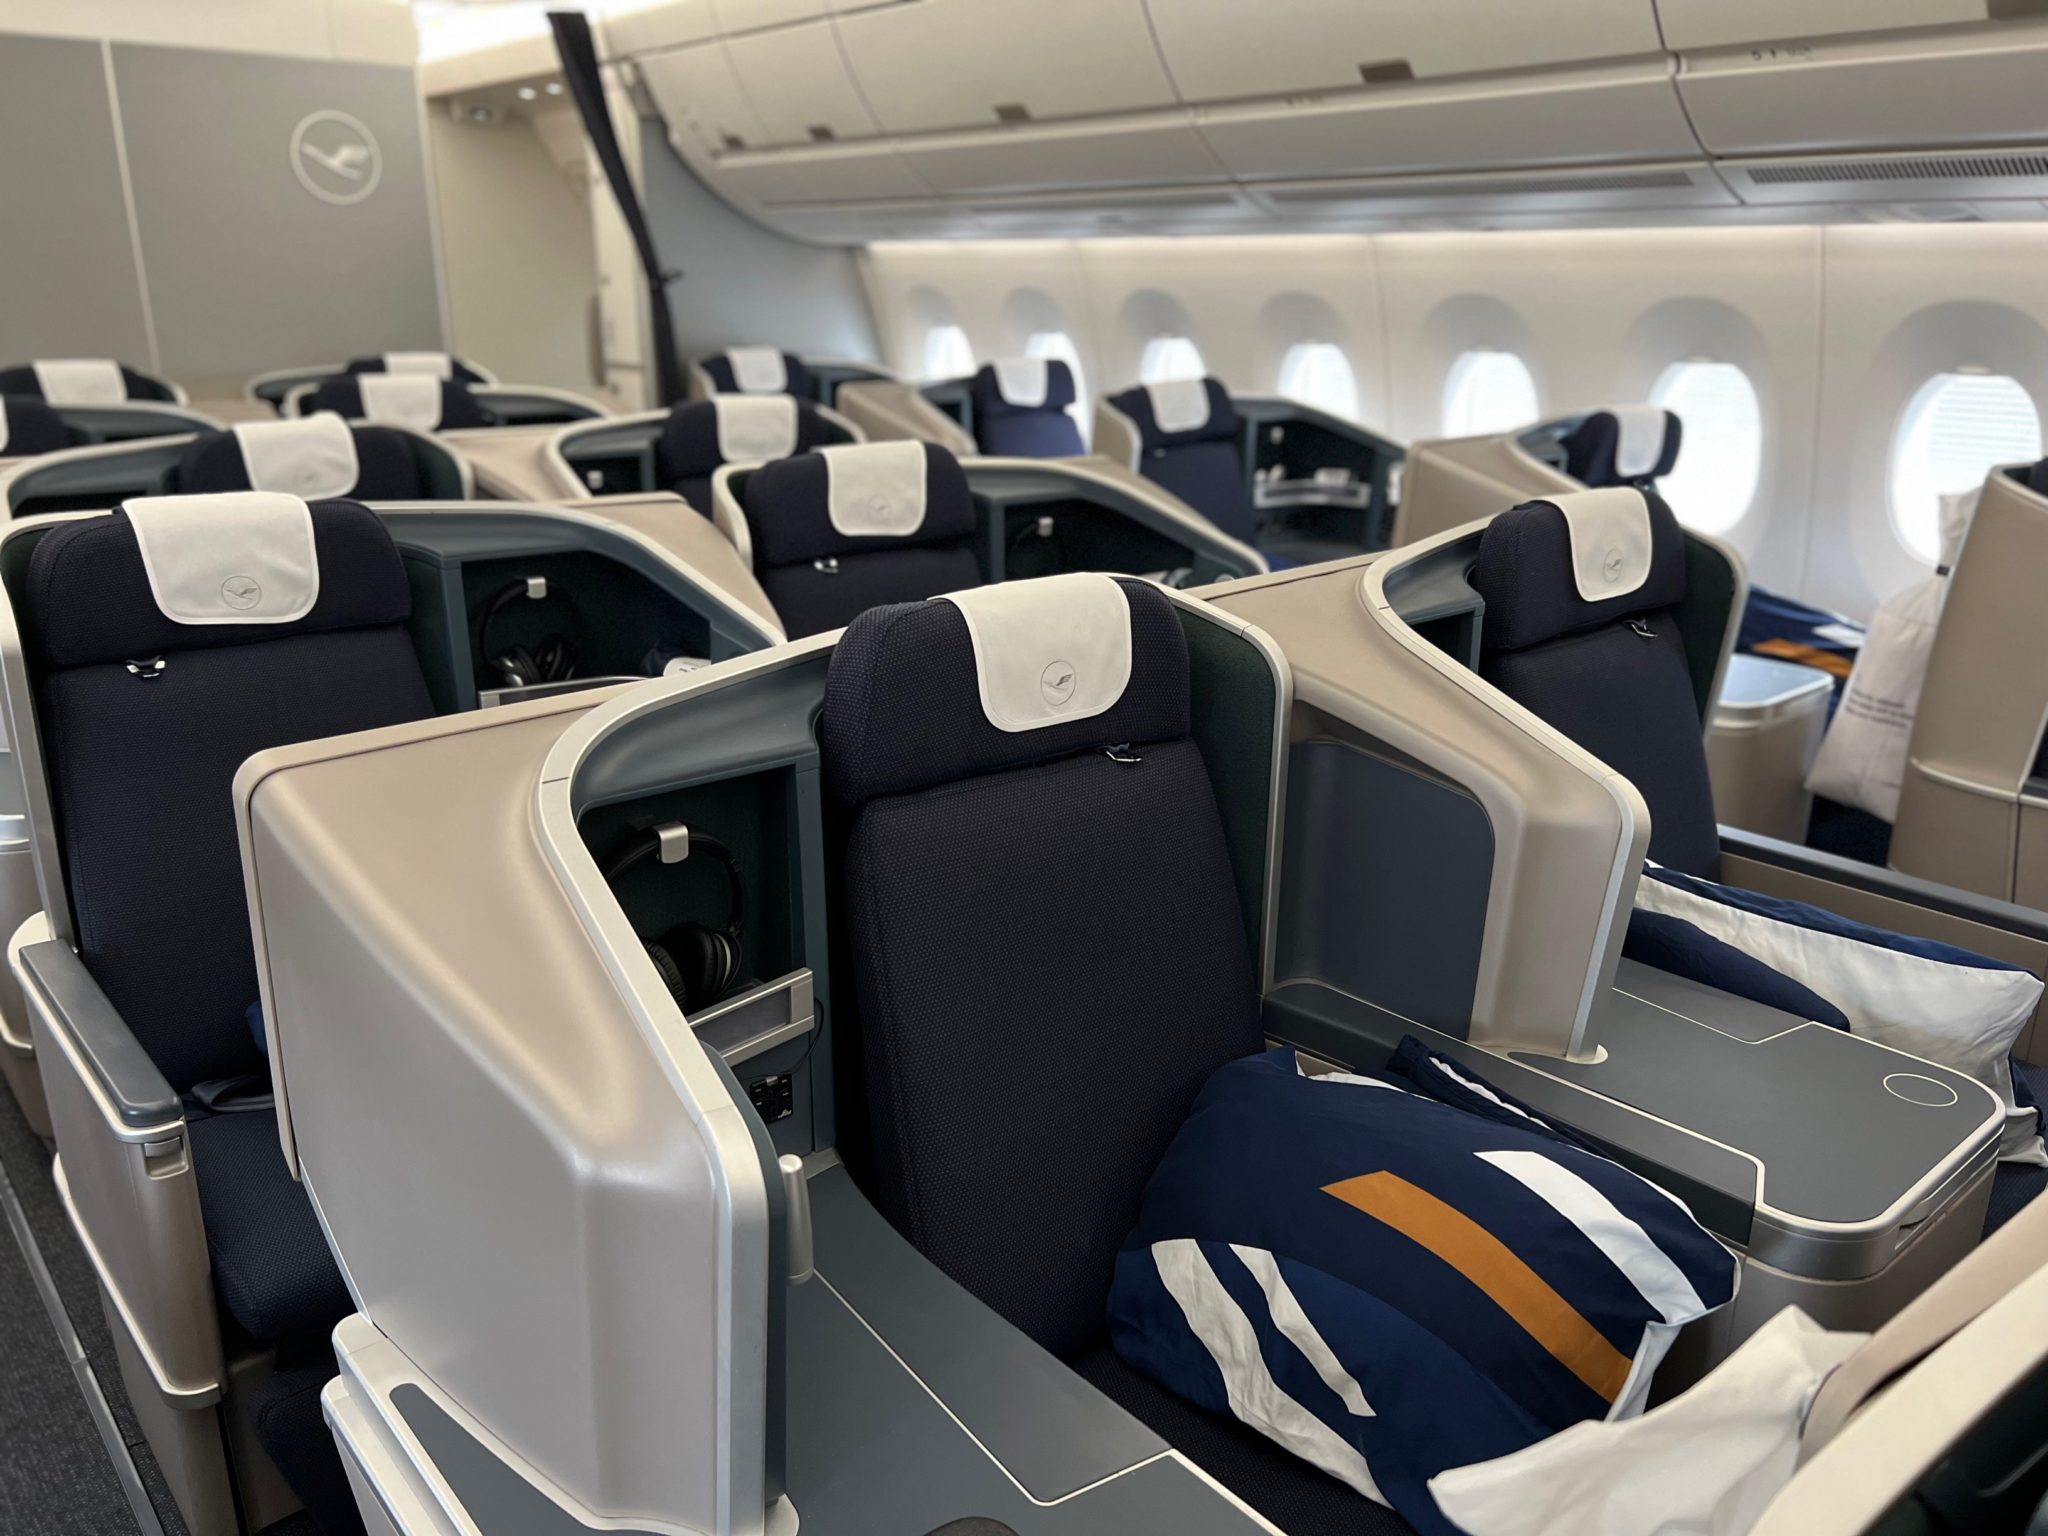 Lufthansa Airbus A350 Munich First Aircraft With Upgraded Business